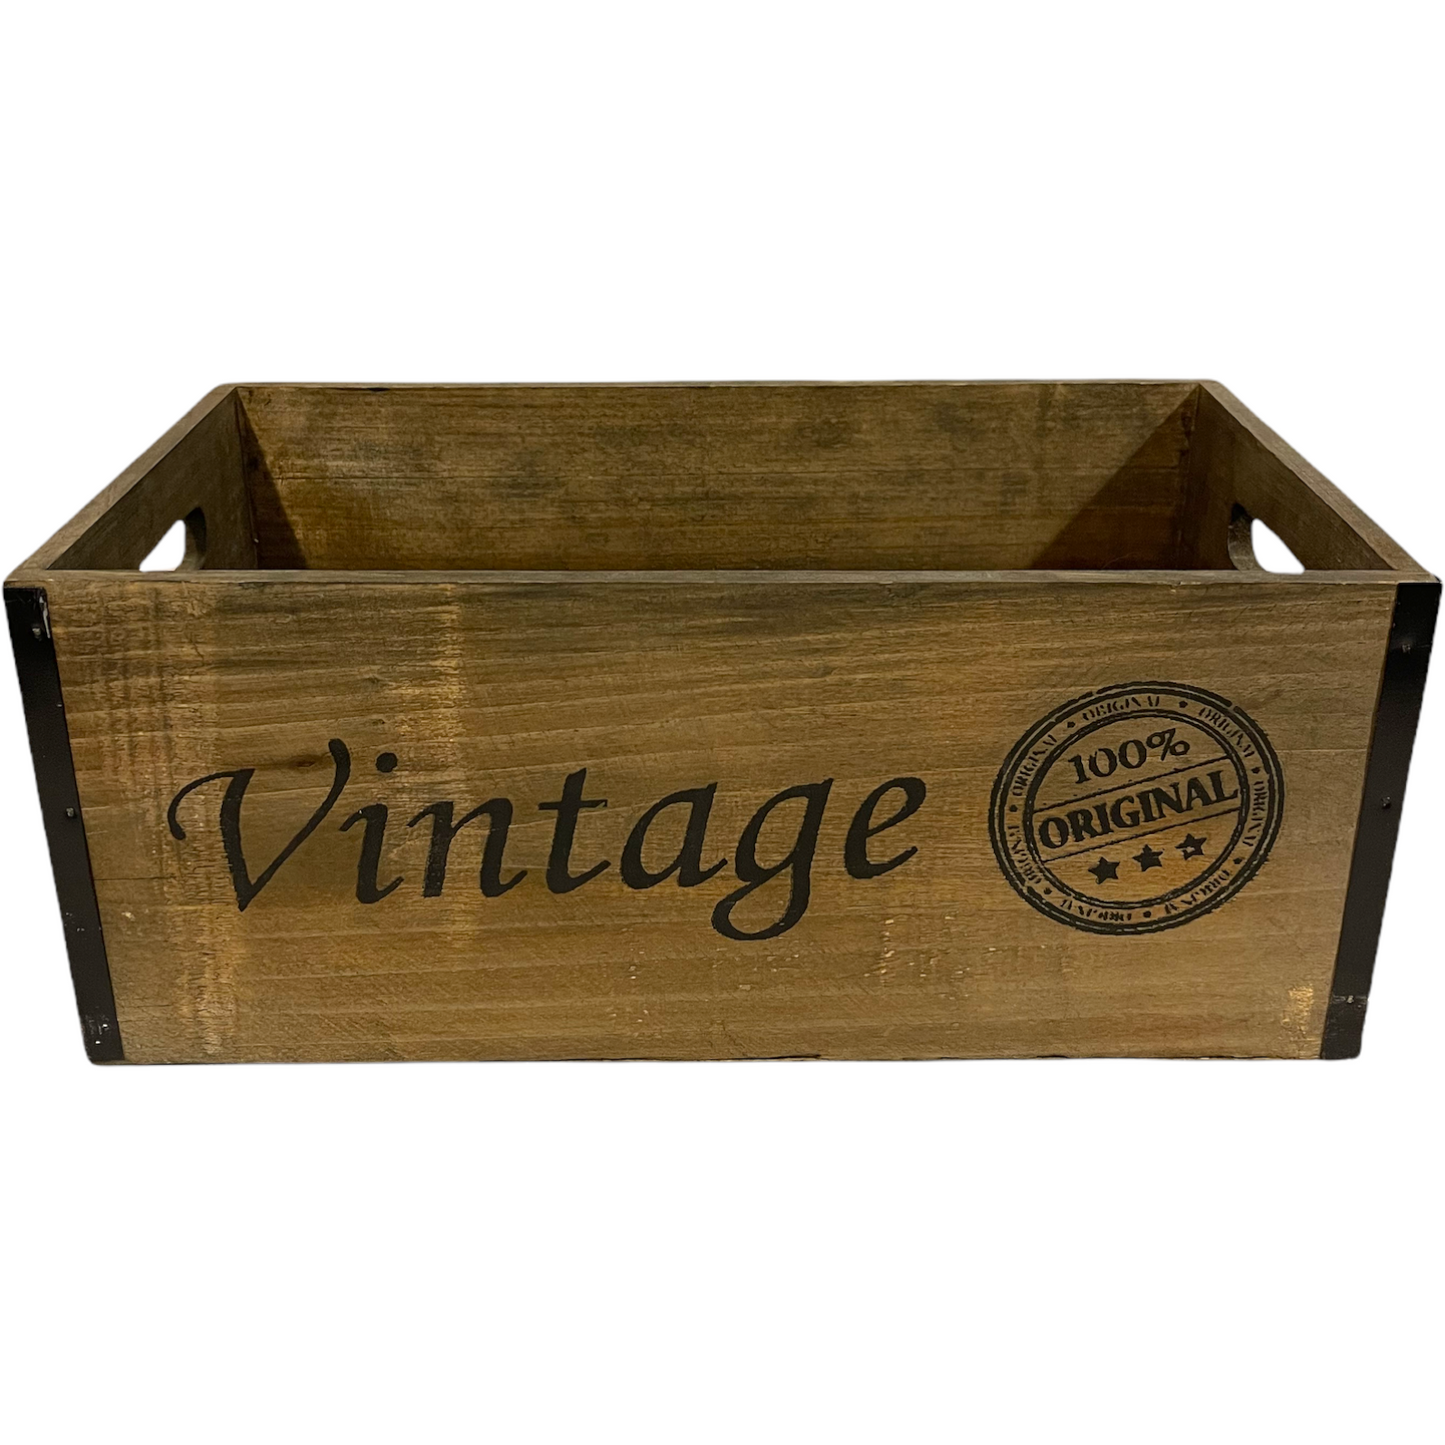 VINTAGE WOOD CONTAINER